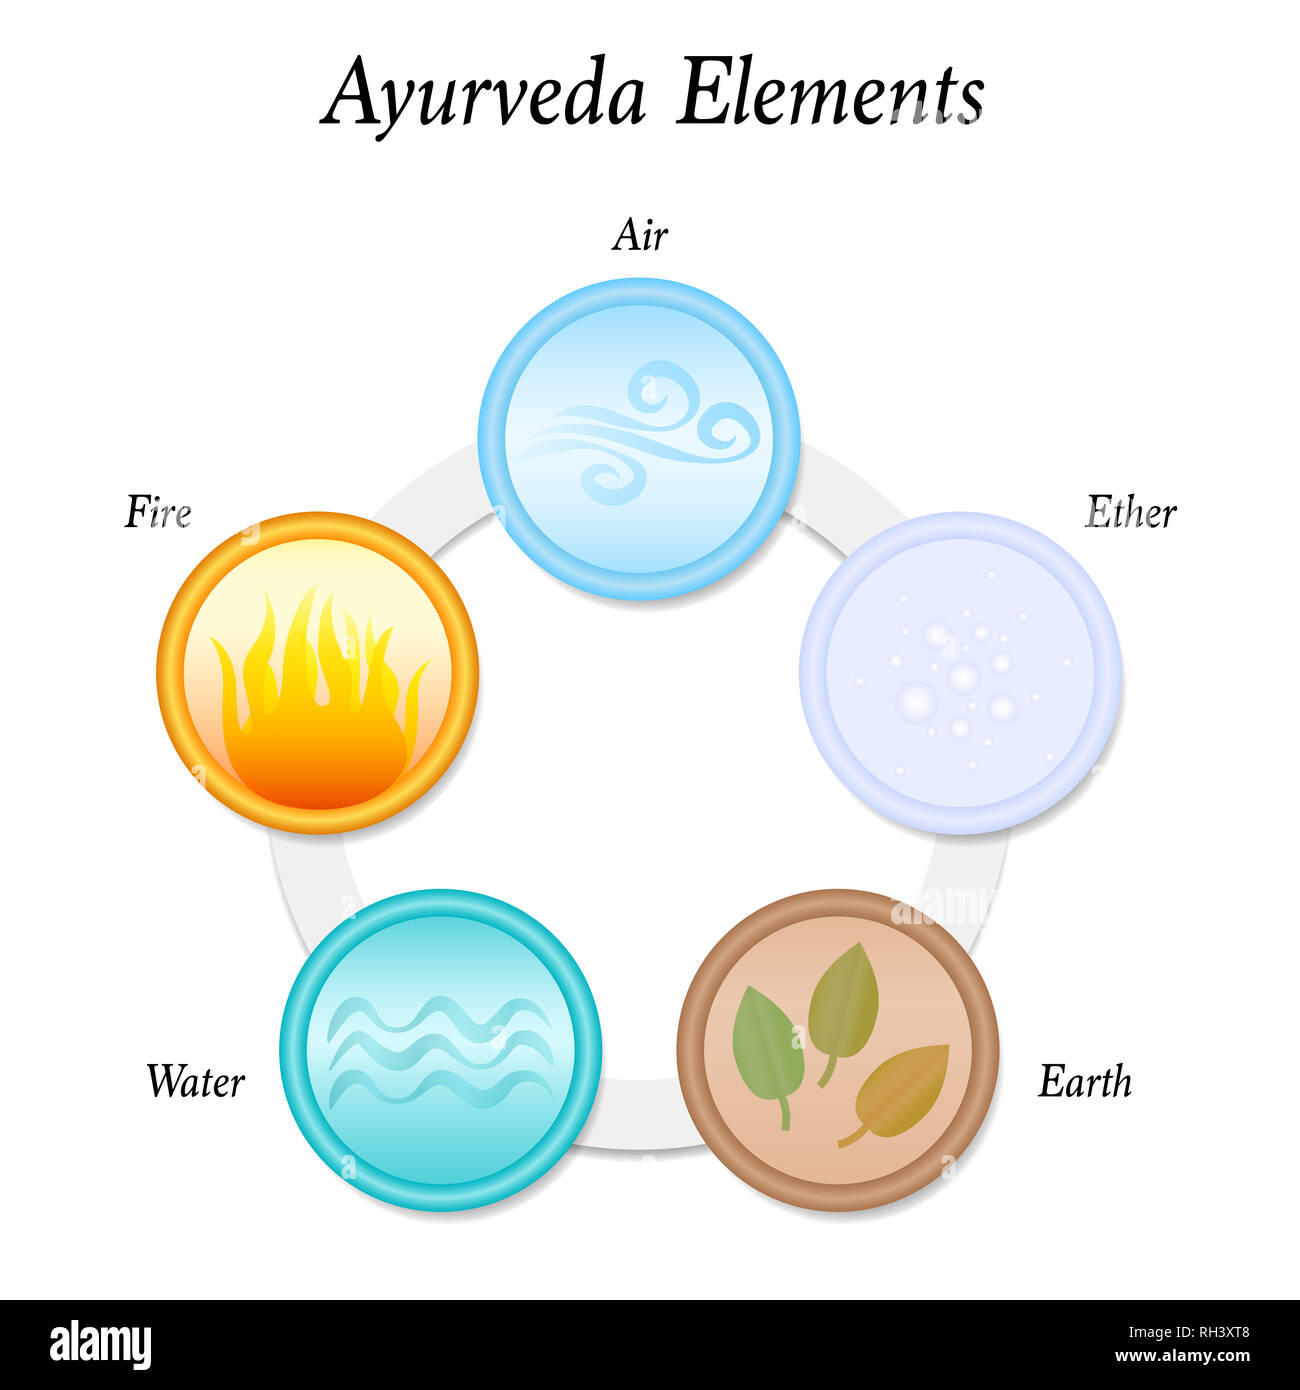 The five Ayurveda elements Earth, Fire, Water, Air and Ether - illustration on white background. Circular icons. Stock Photo